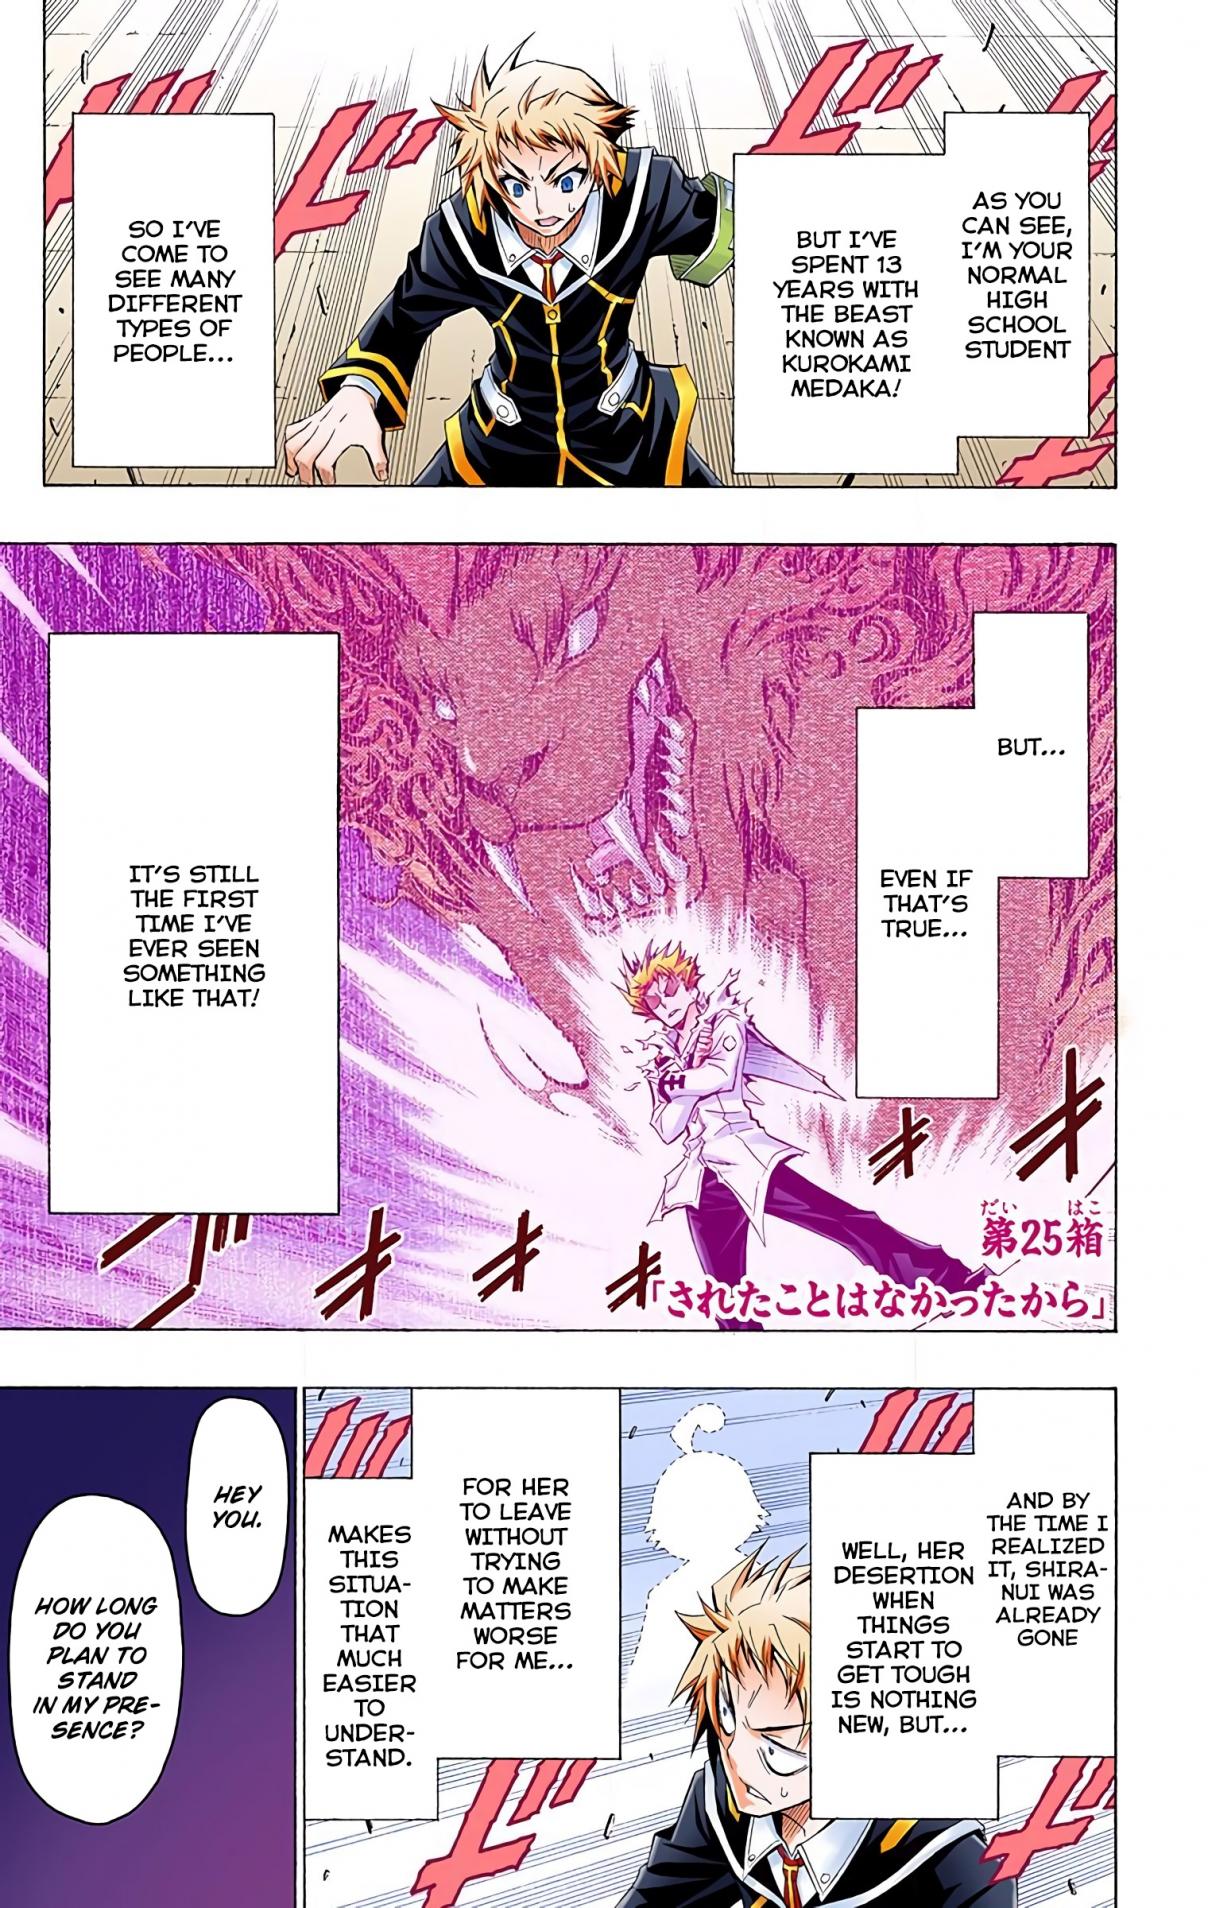 Medaka Box Digital Colored Comics Vol. 3 Ch. 25 It's Never Been Done to Me